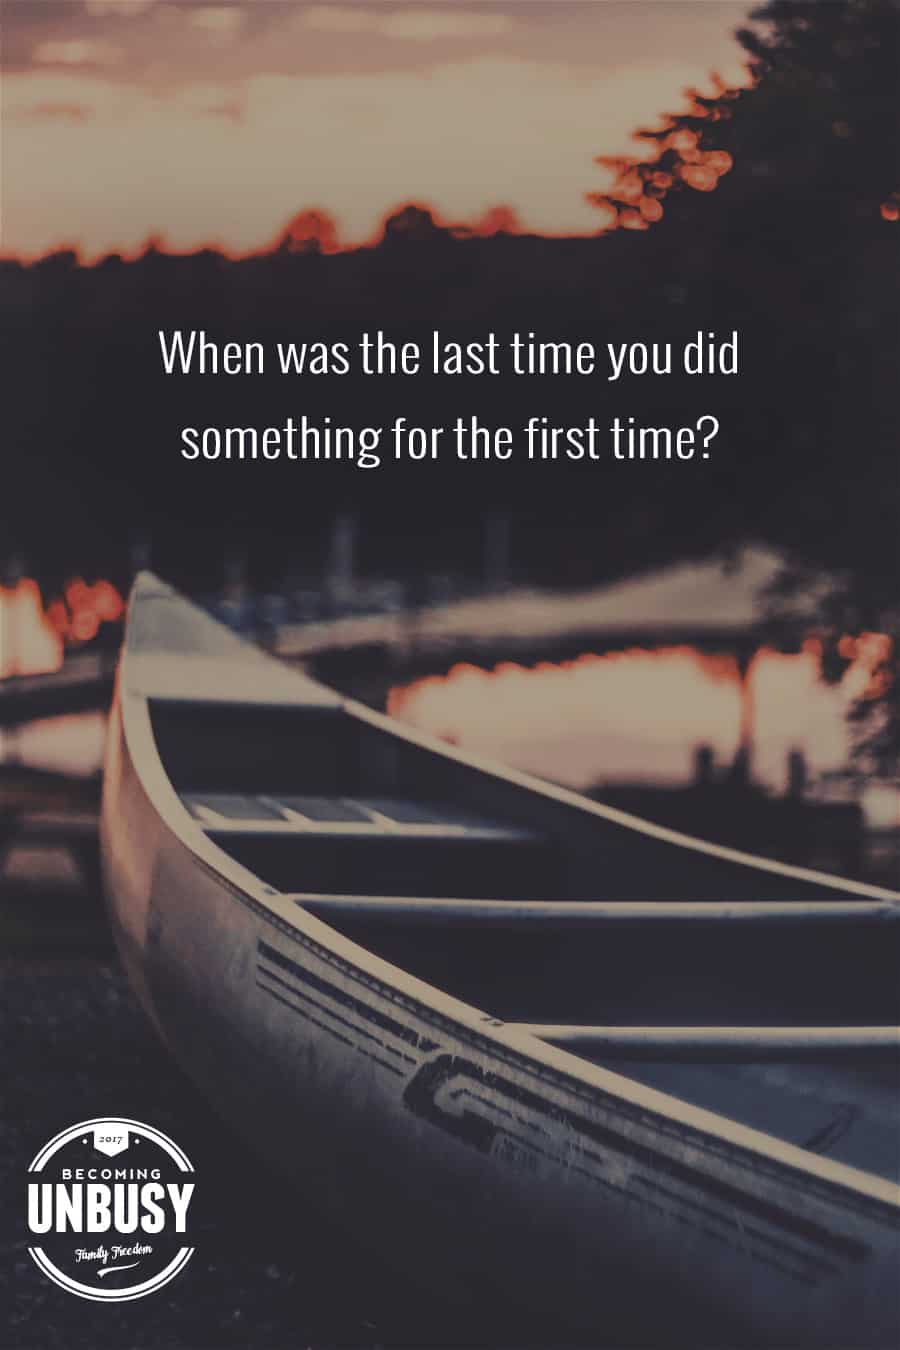 When was the last time you did something for the first time? #quote #lifequote #becomingunbusy #intentionalliving *Loving this post on slowing down time with first moments. So good.